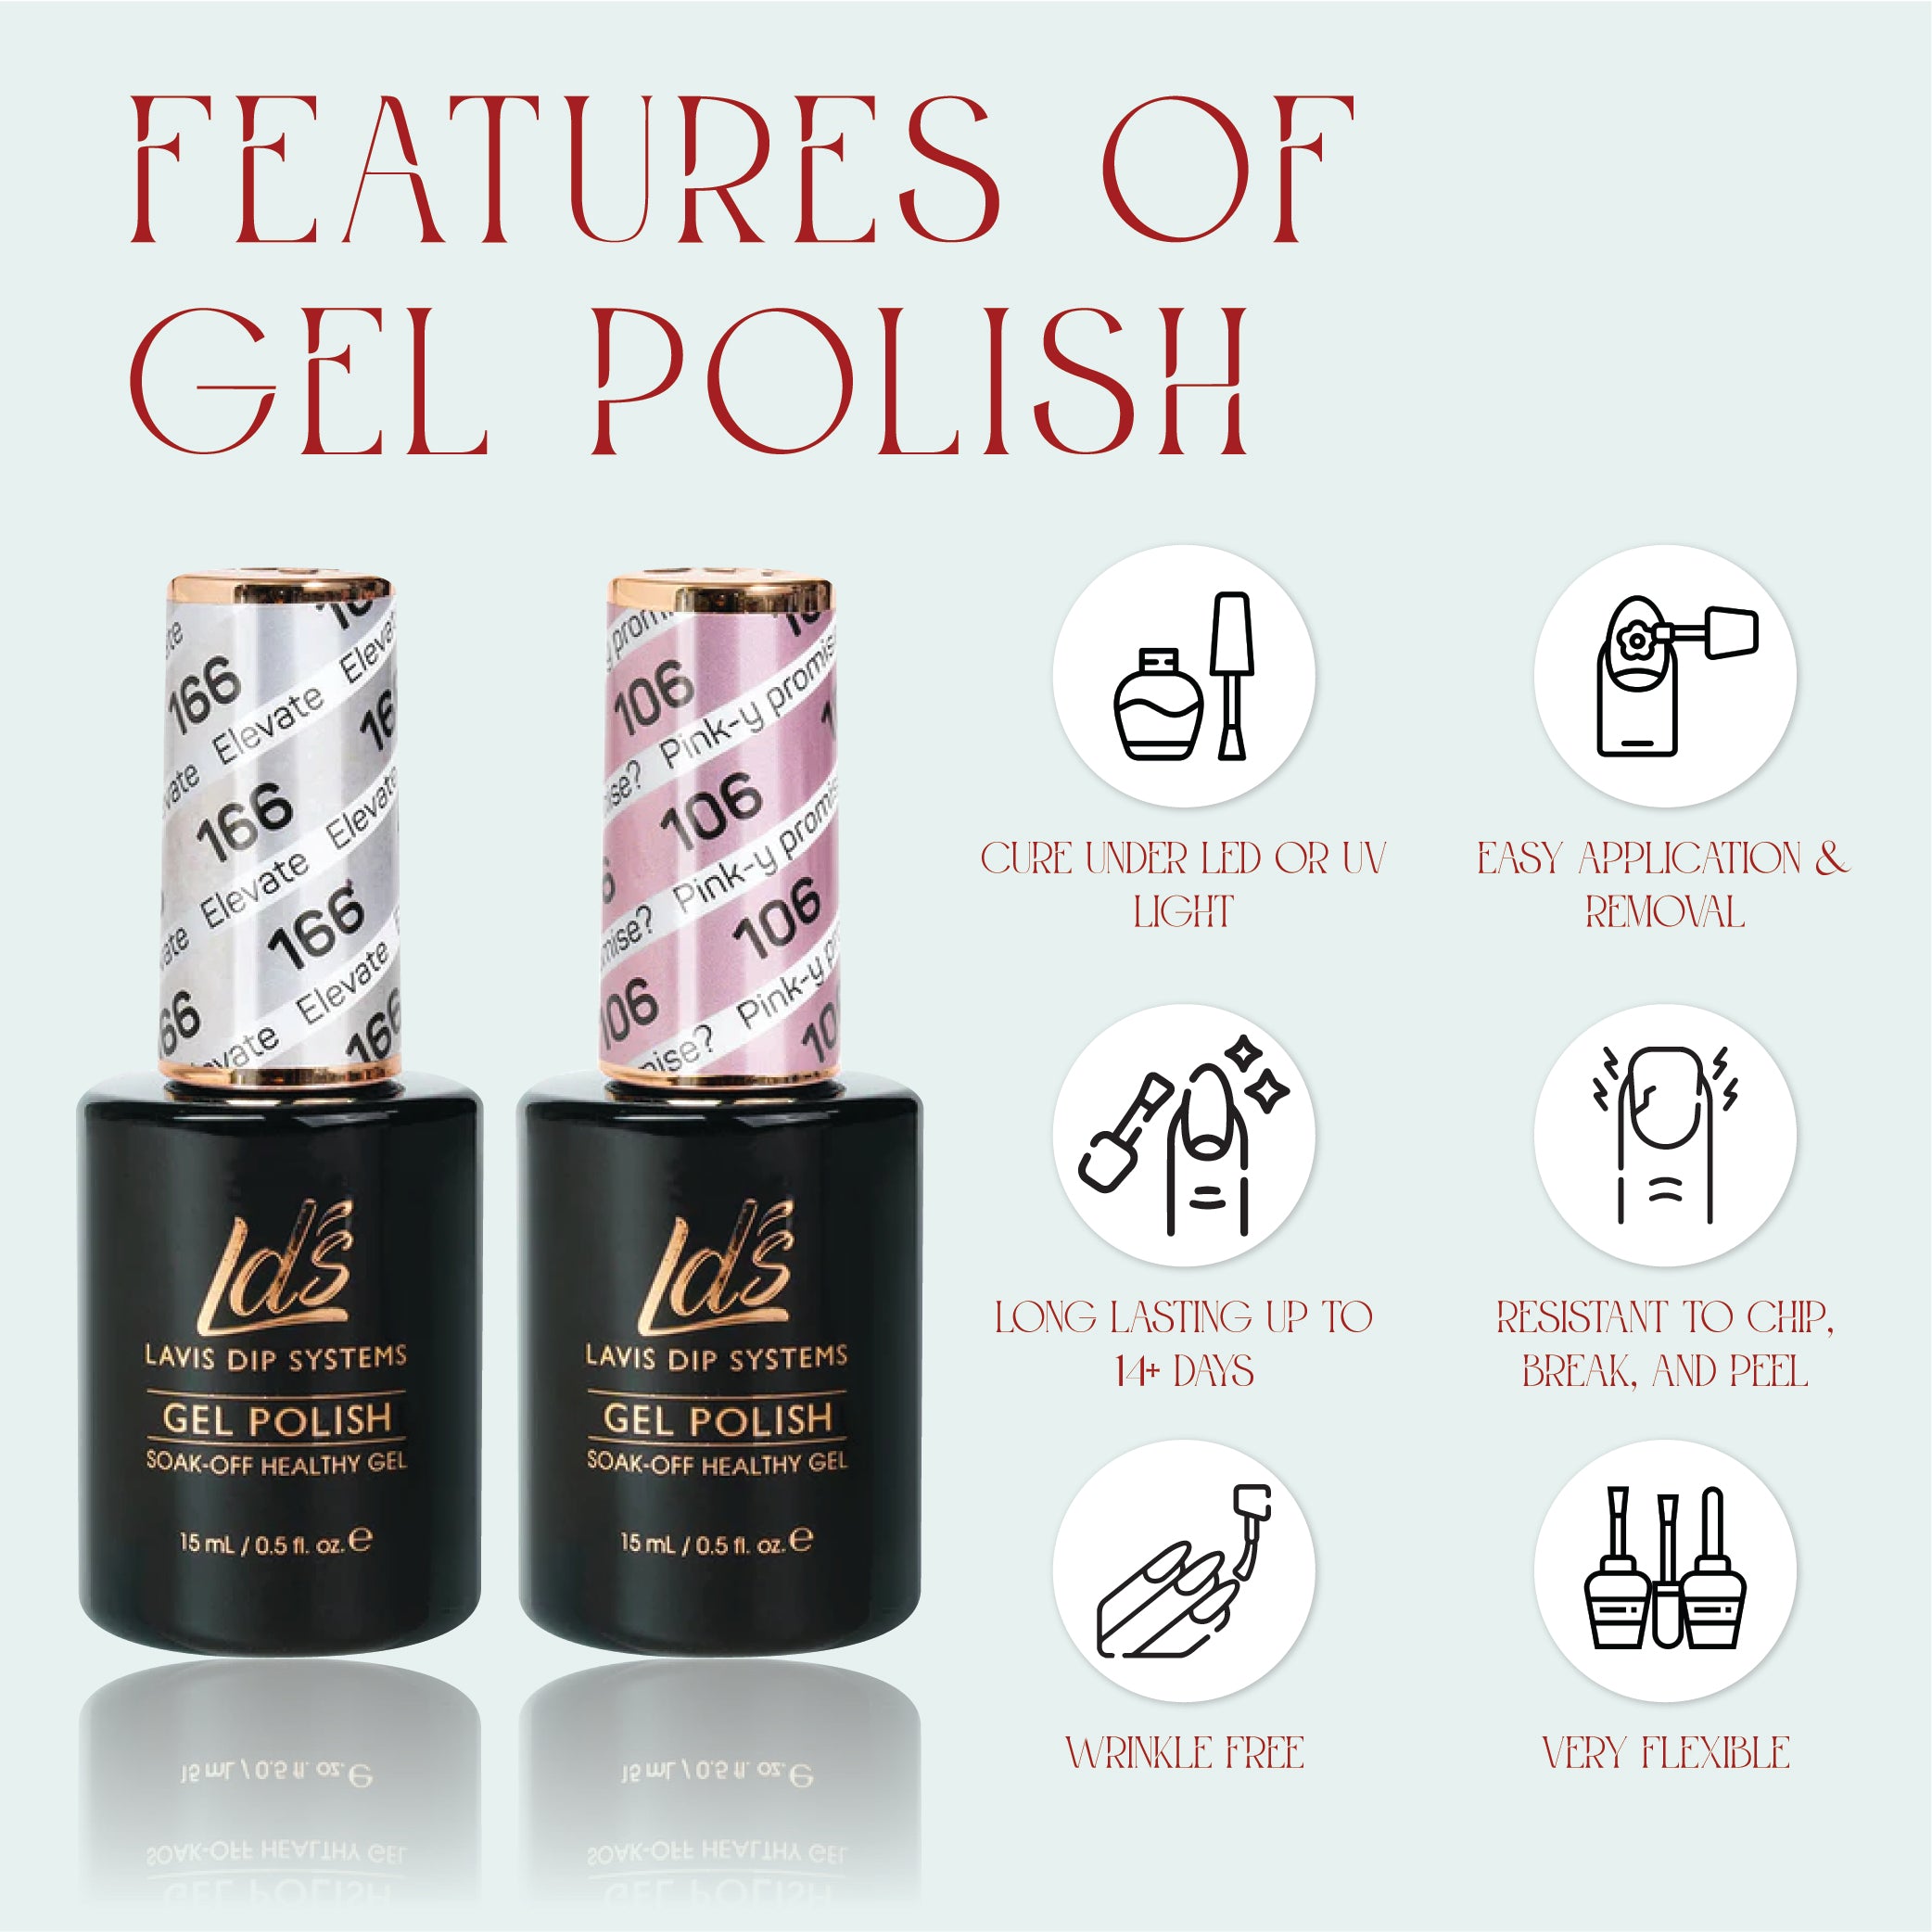 LDS Gel Nail Polish Duo - 137 Red Colors - My Heart's On Fire